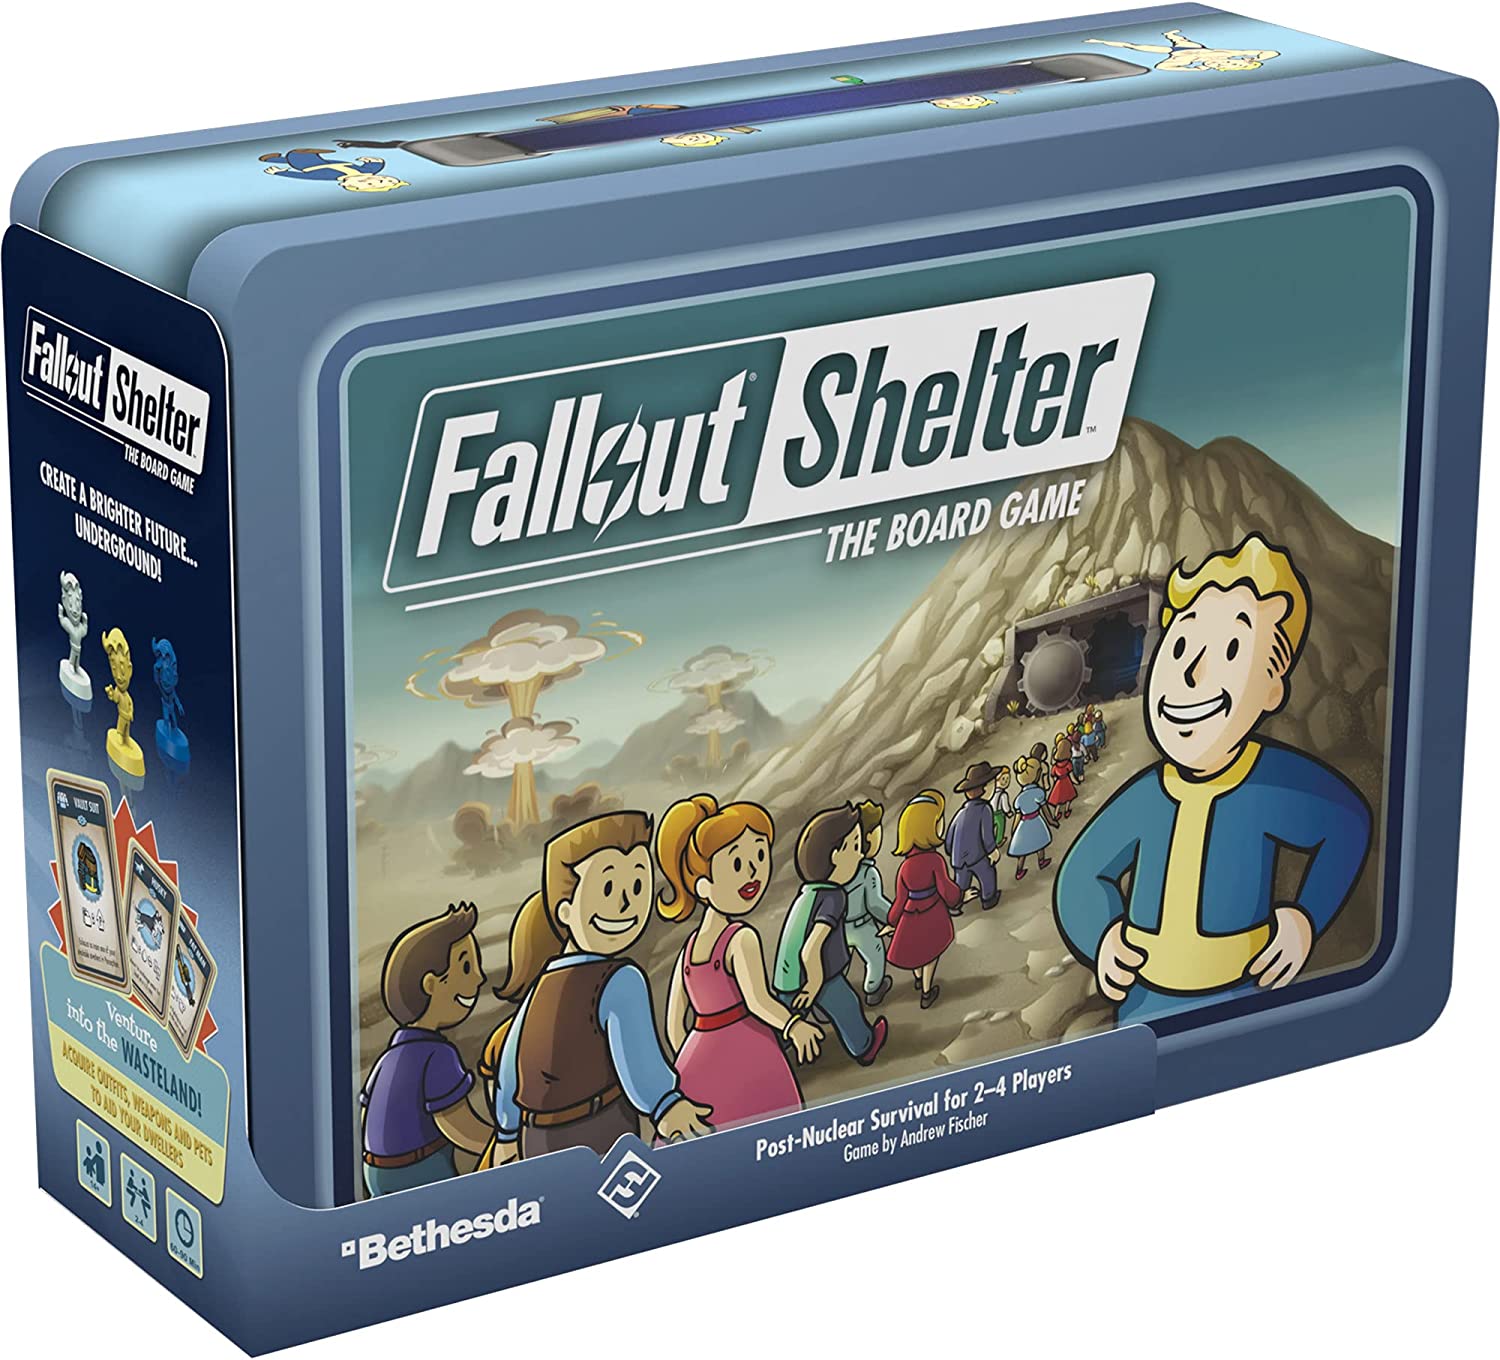 Fallout Shelter The Board Game (Base) | Strategy Board Game | Apocalyptic Adventure Game for Adults and Teens | Ages 14+ | 2-4 Players | Average Playtime 60-90 Minutes | Made by Fantasy Flight Games